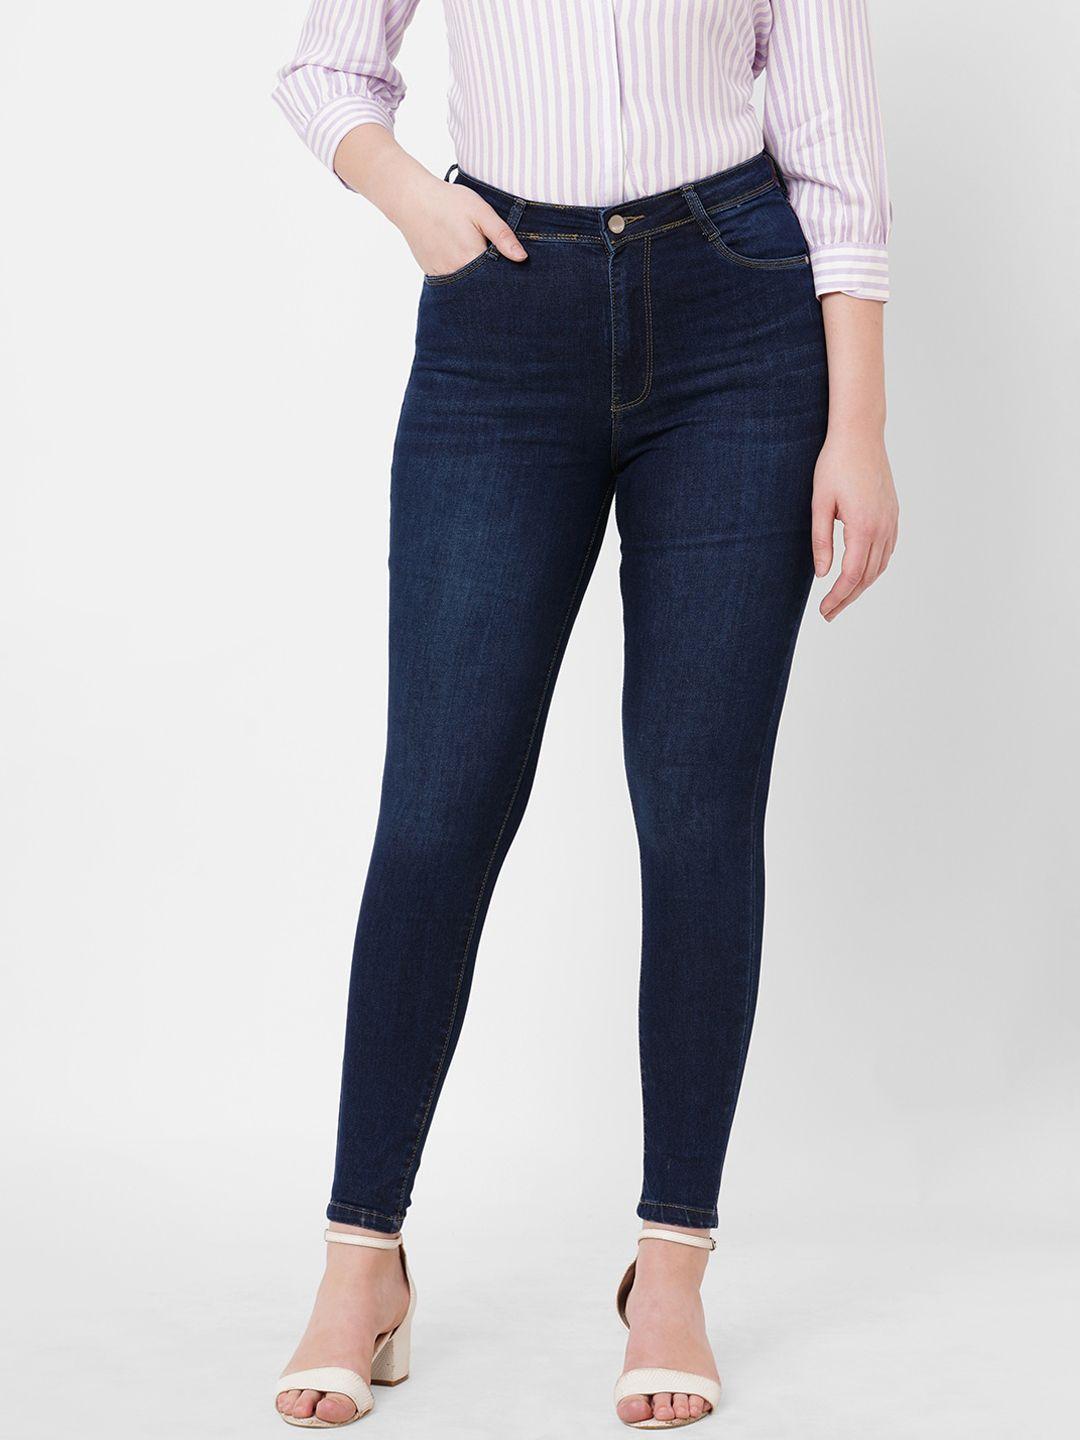 kraus-jeans-women-super-skinny-fit-high-rise-light-fade-jeans